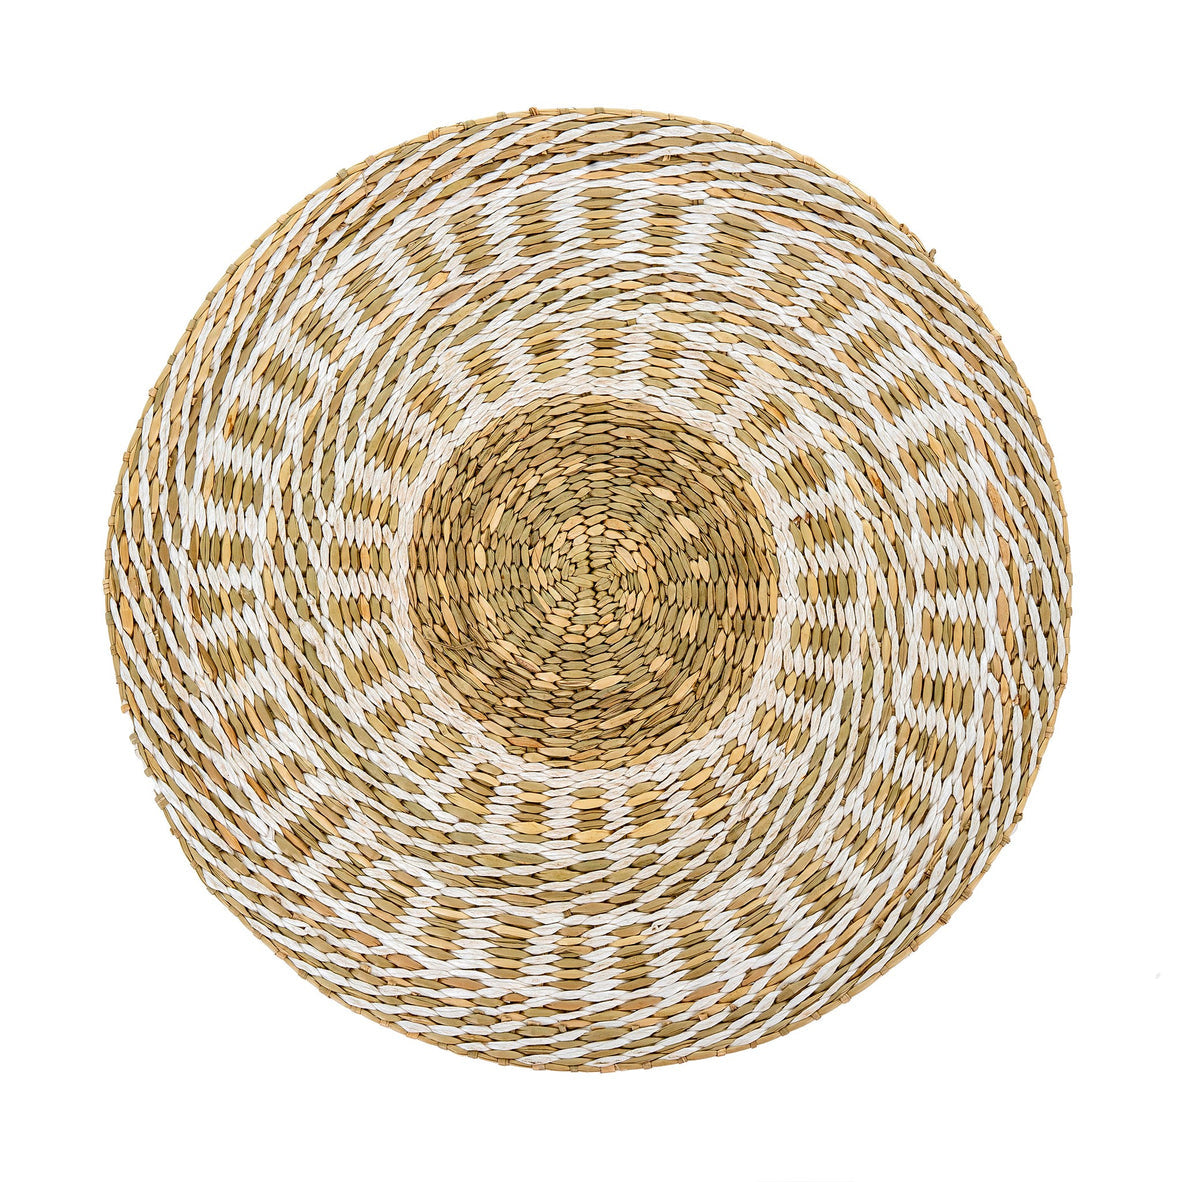 Adelaide seagrass placemat